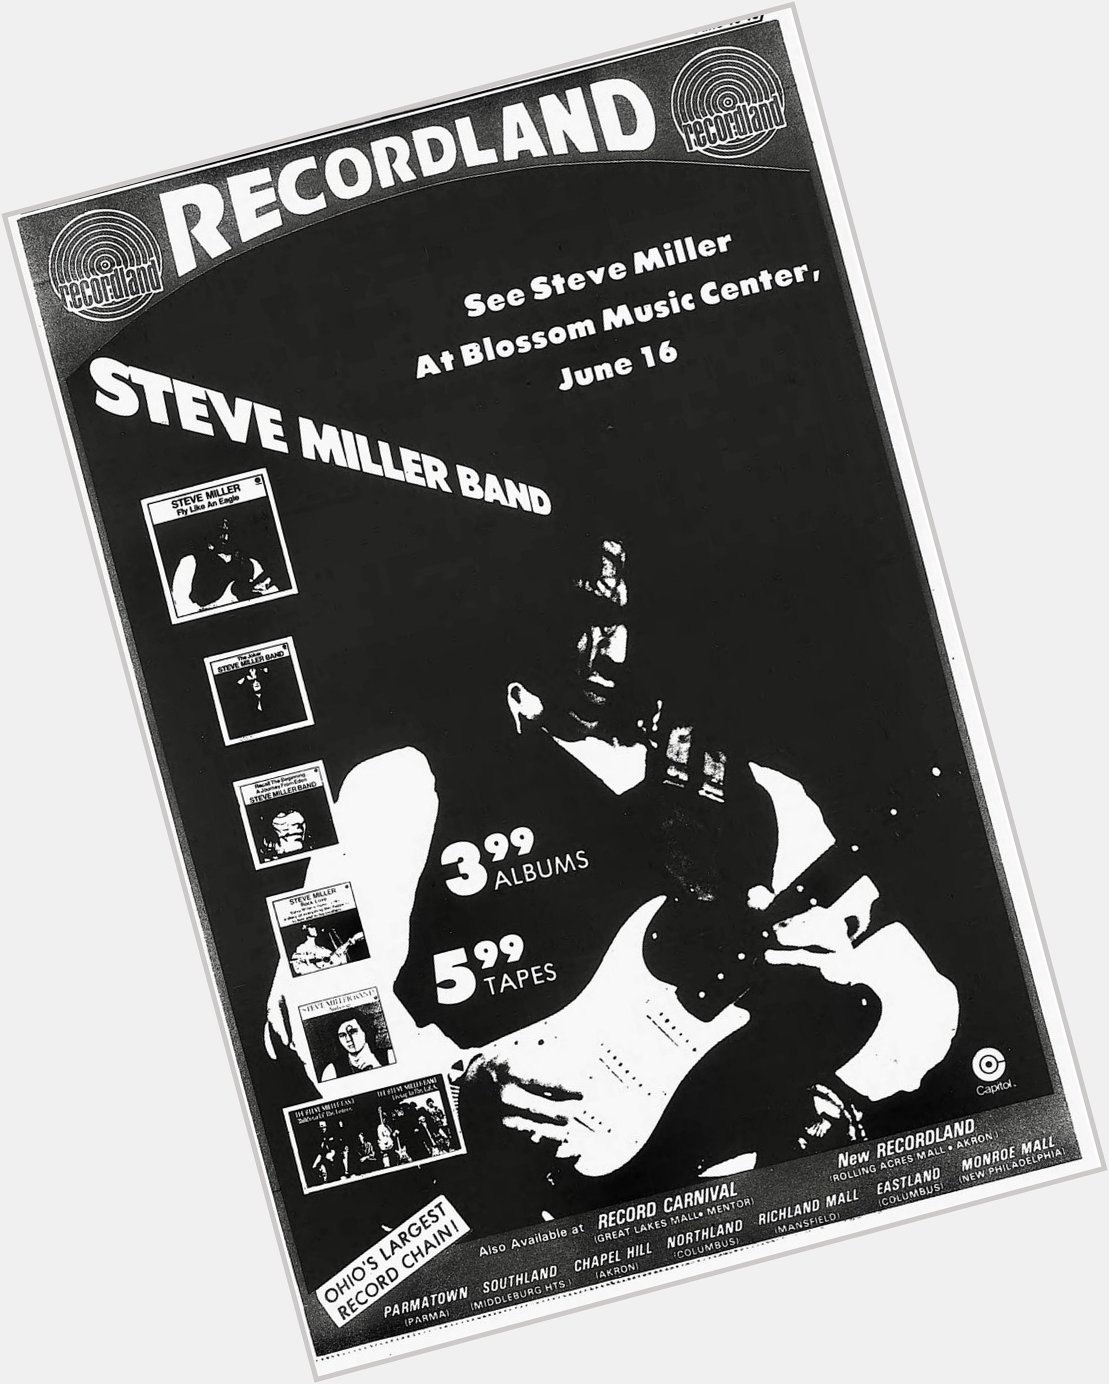 Happy 78th birthday to Steve Miller!

Photo Ad from Cleveland Scene June 1976 